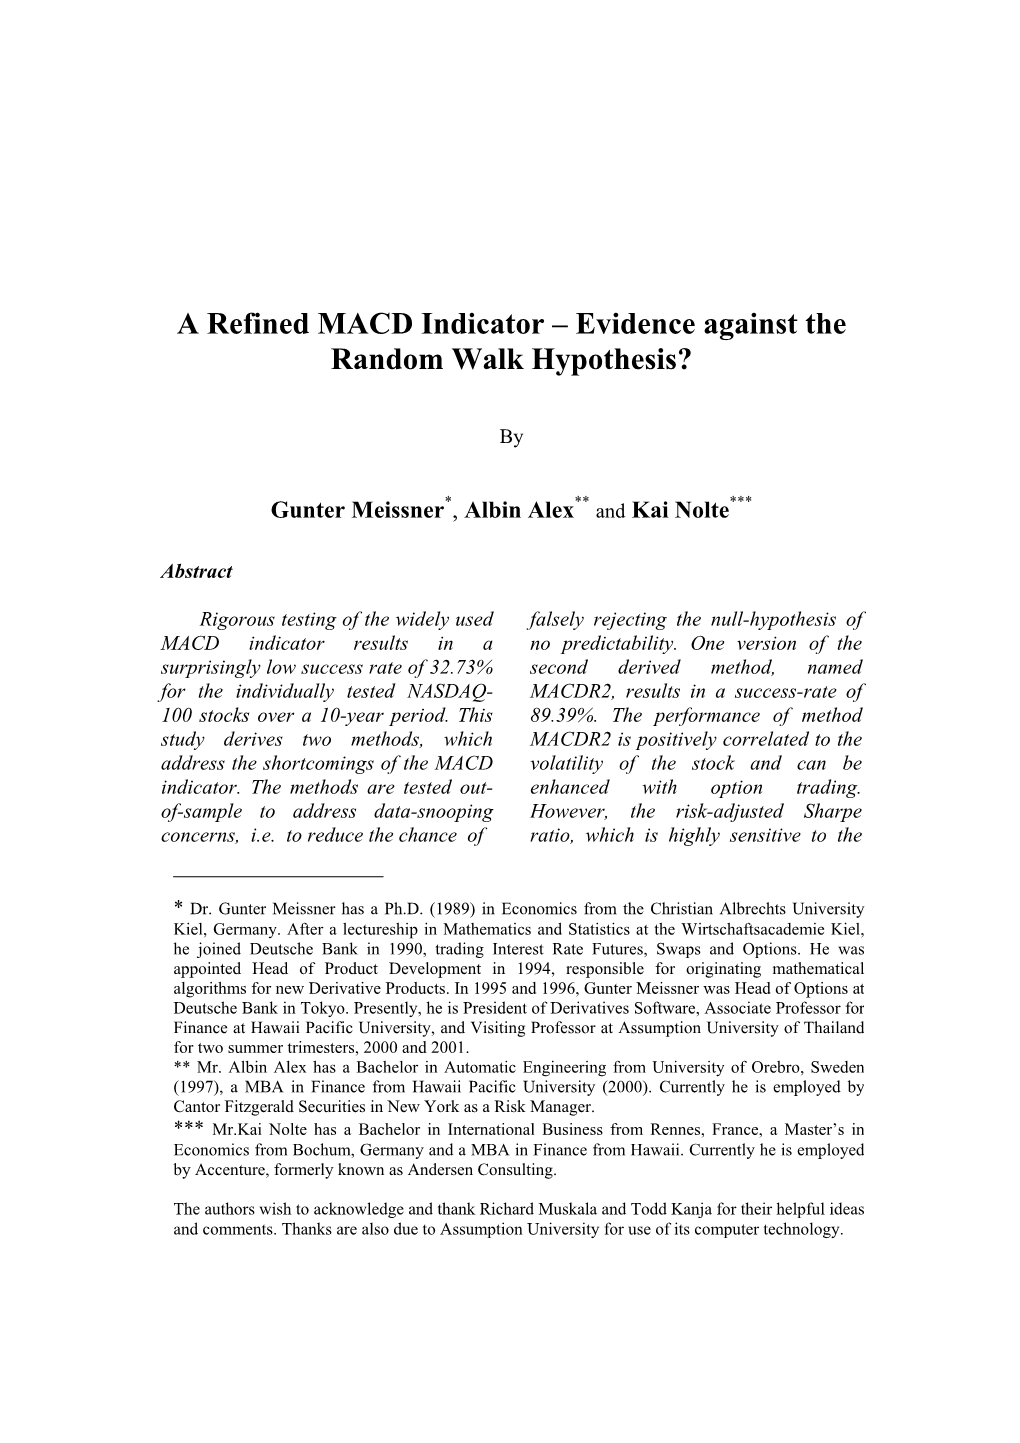 A Refined MACD Indicator – Evidence Against the Random Walk Hypothesis?